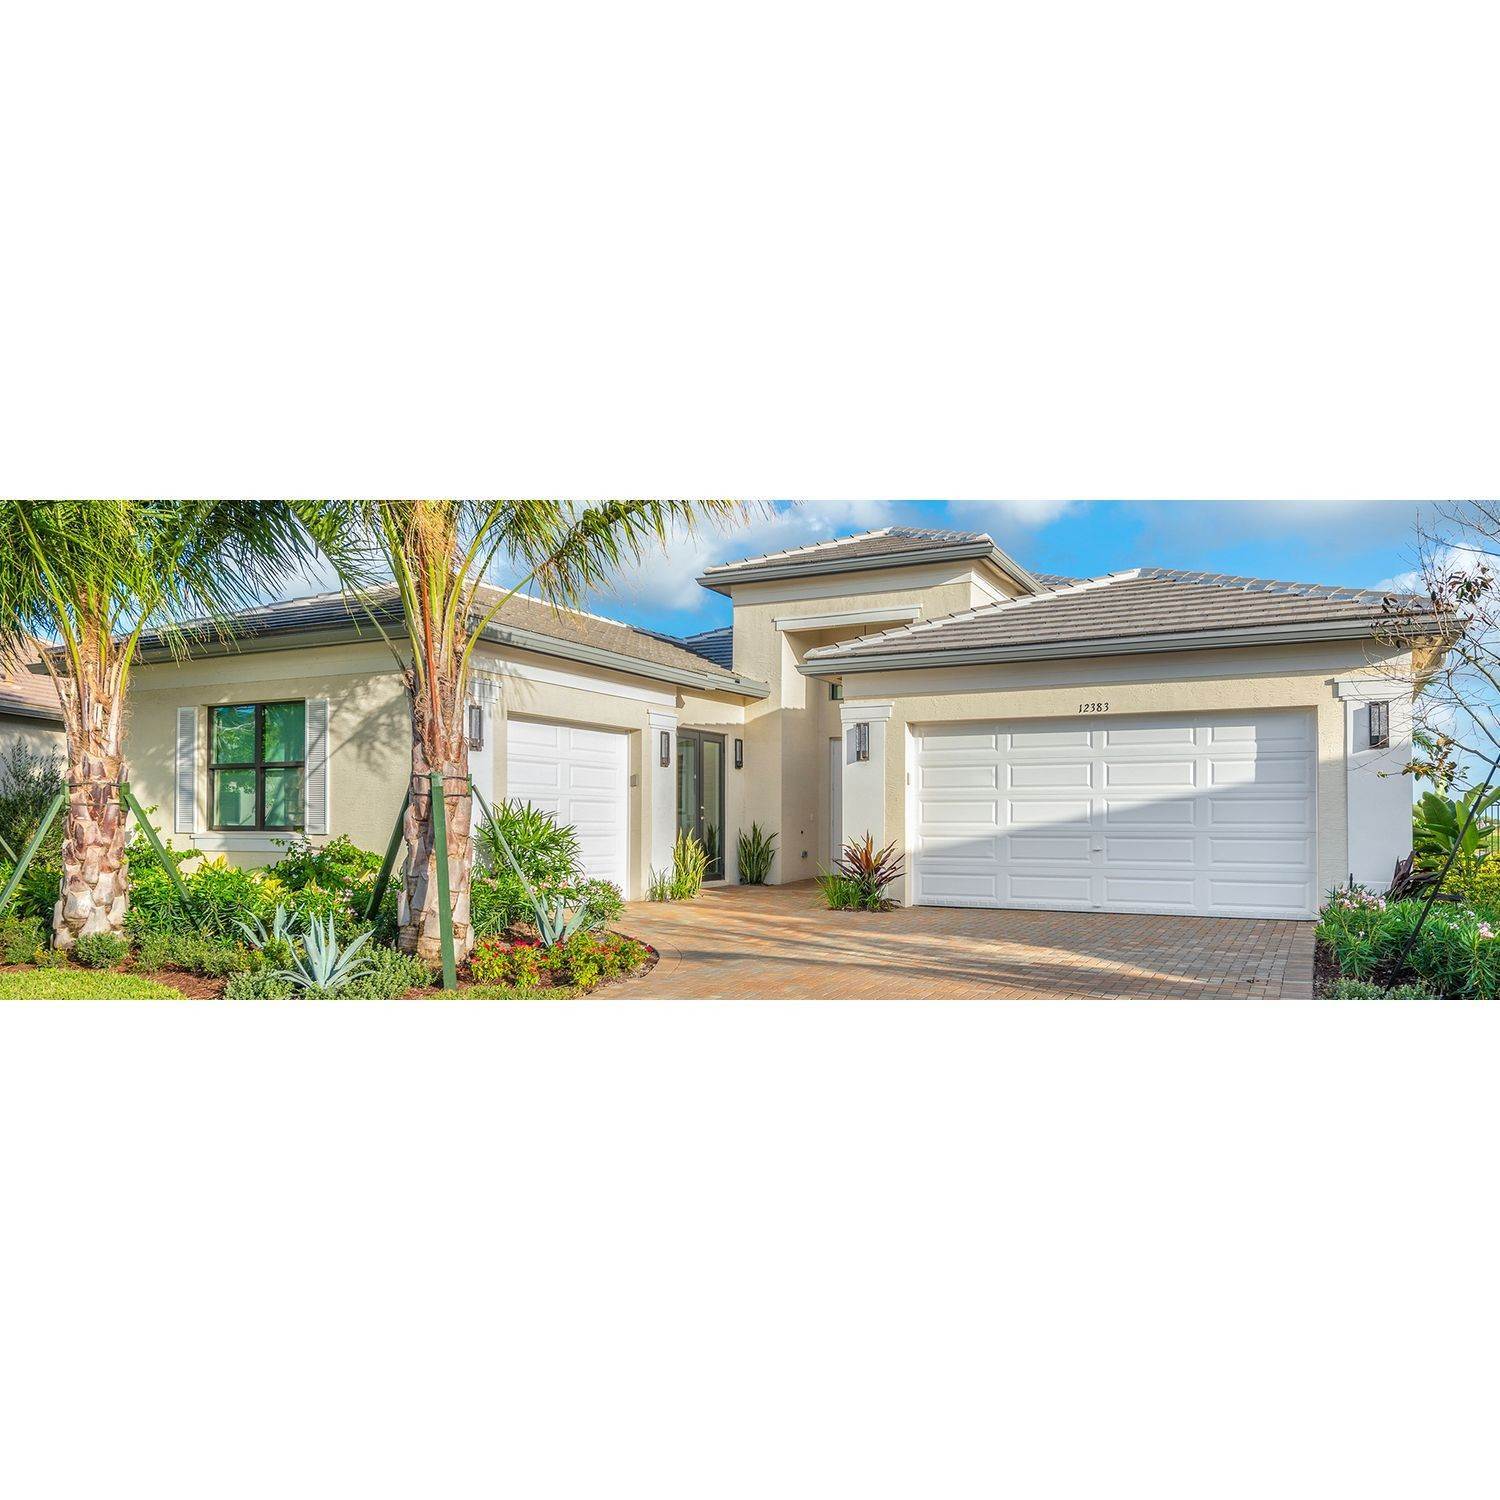 25. Valencia Walk at Riverland® xây dựng tại 10735 SW Matisse Lane, Port St. Lucie, FL 34987